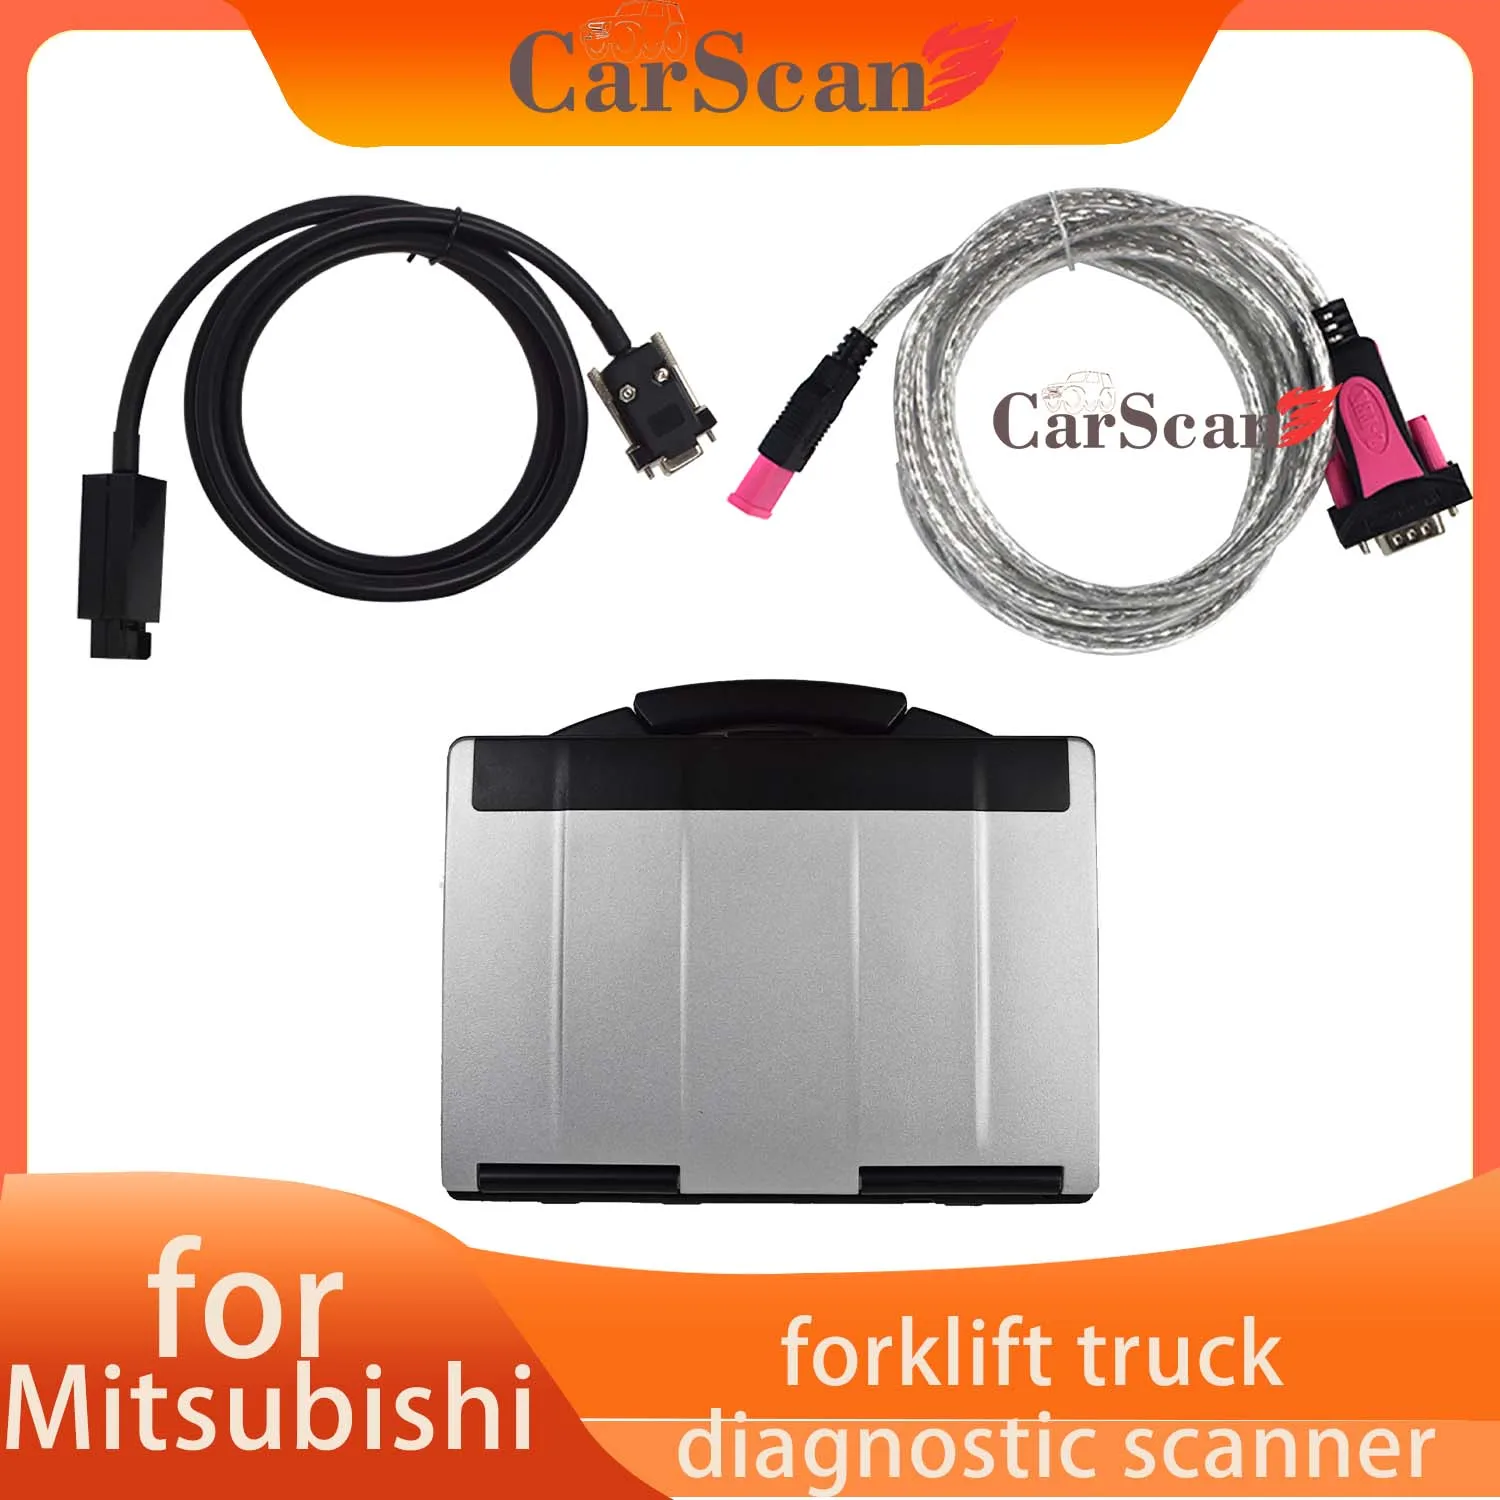 

CF53 Laptop+for MTU Forklift 16A68-00500 16A68-11320 Auto Scanner Cable for MITSUBISHI Lift Truck Diagnostic Tool